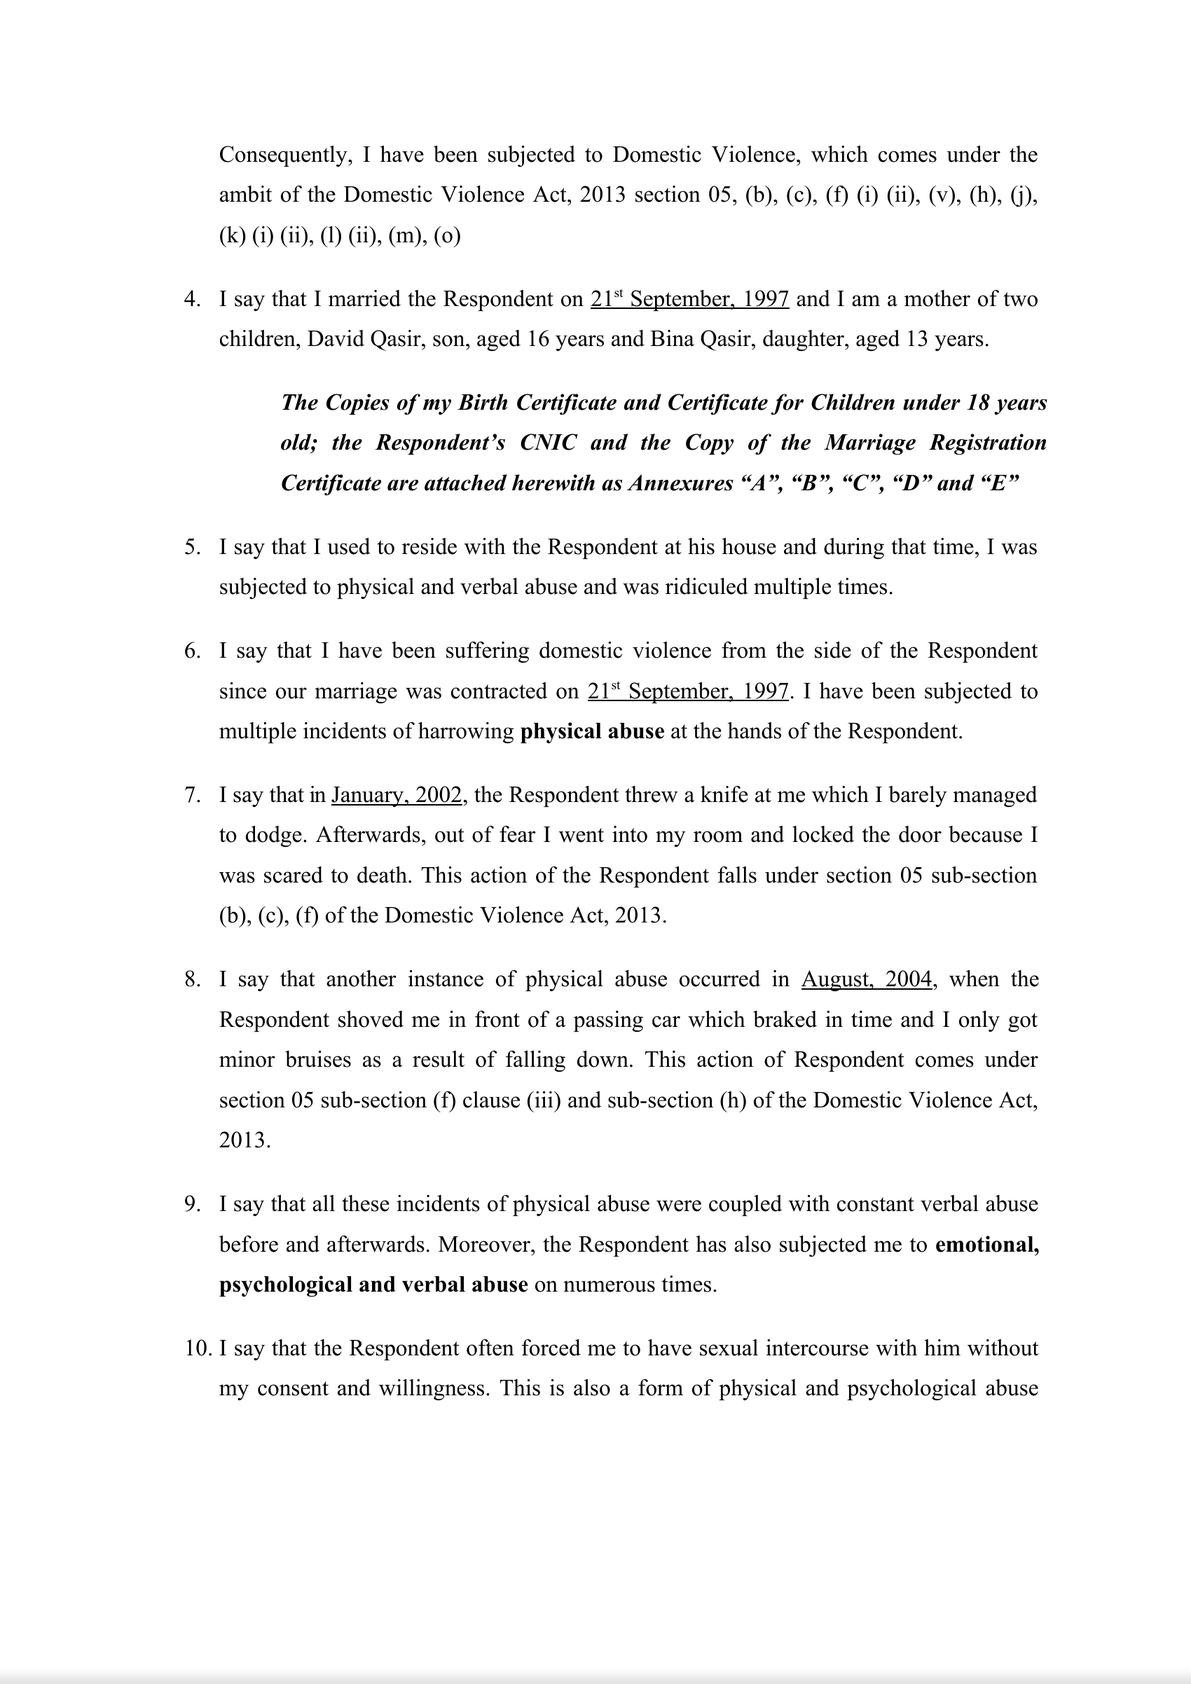 APPLICATION U/S 12 OF THE SINDH DOMESTIC VIOLENCE (PREVENTION & PROTECTION) ACT, 2013-2